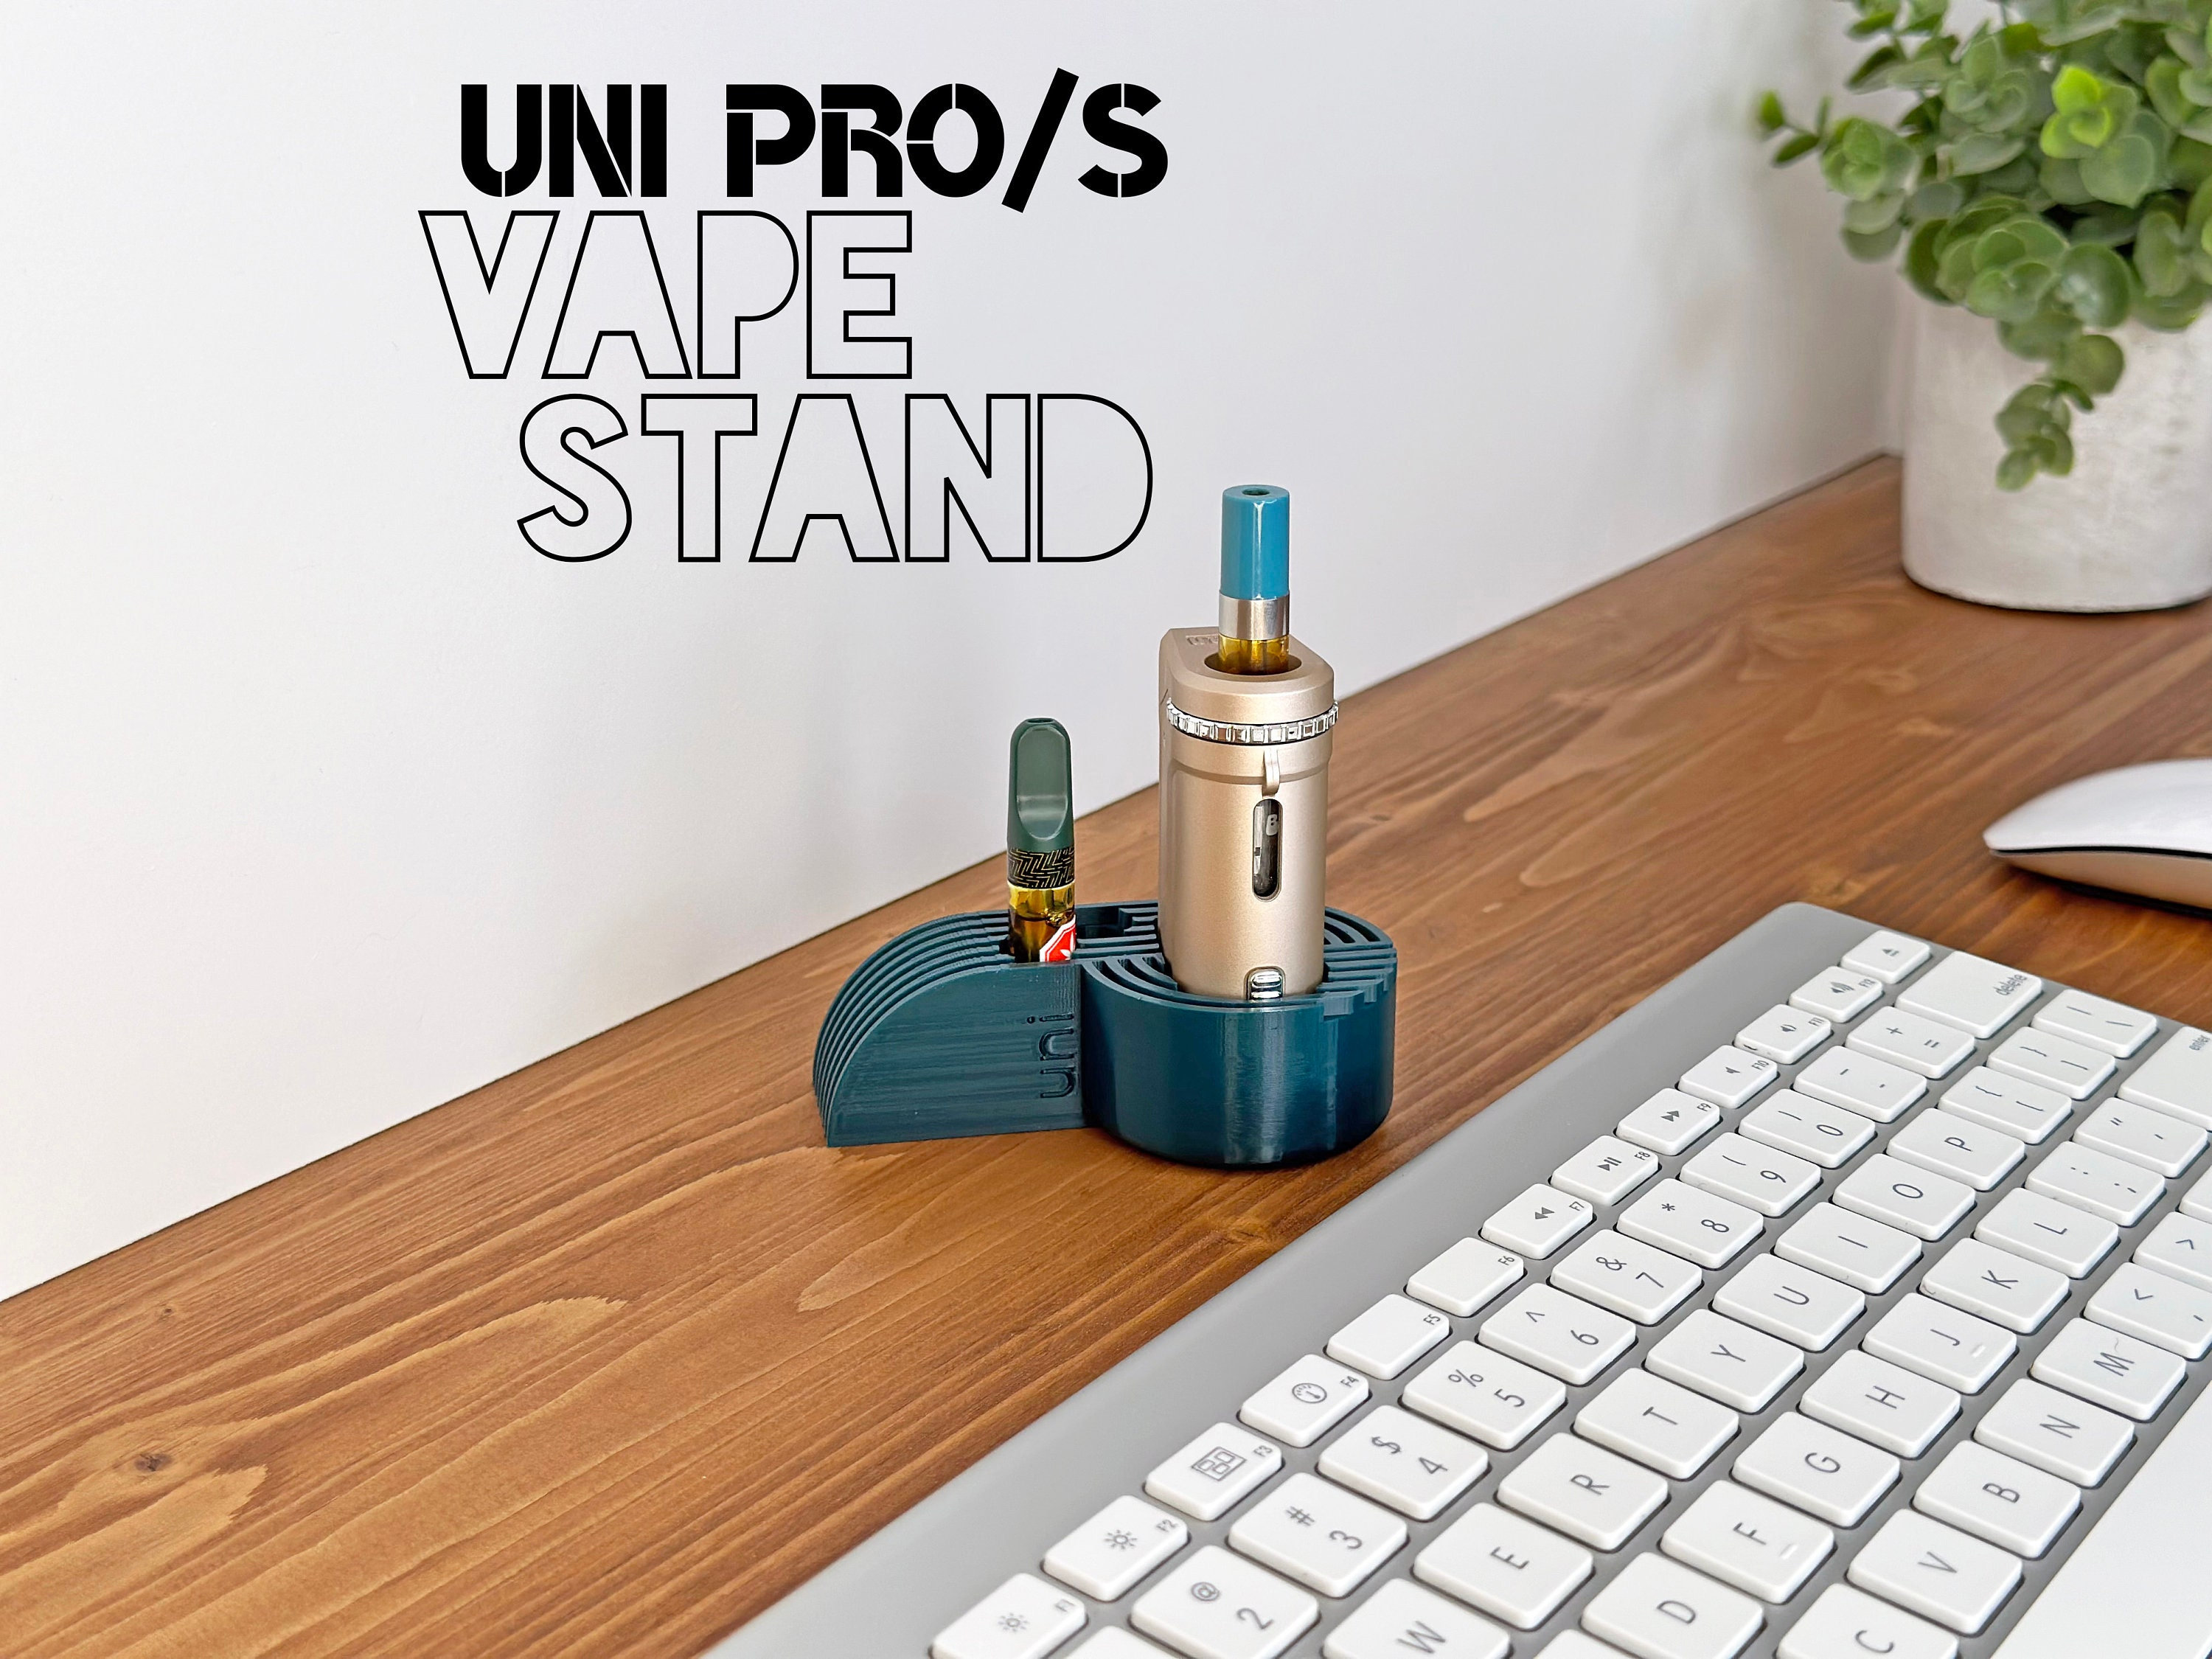 Wholesale Vape Carry Holder Stand Rubber E-Cigarette Multi Functional  Display Stand for Different Sizes Vape Tank Vape Battery Accessory - China  Vape Carry Holder Stand, Vape Carry Holder Stand Rubber